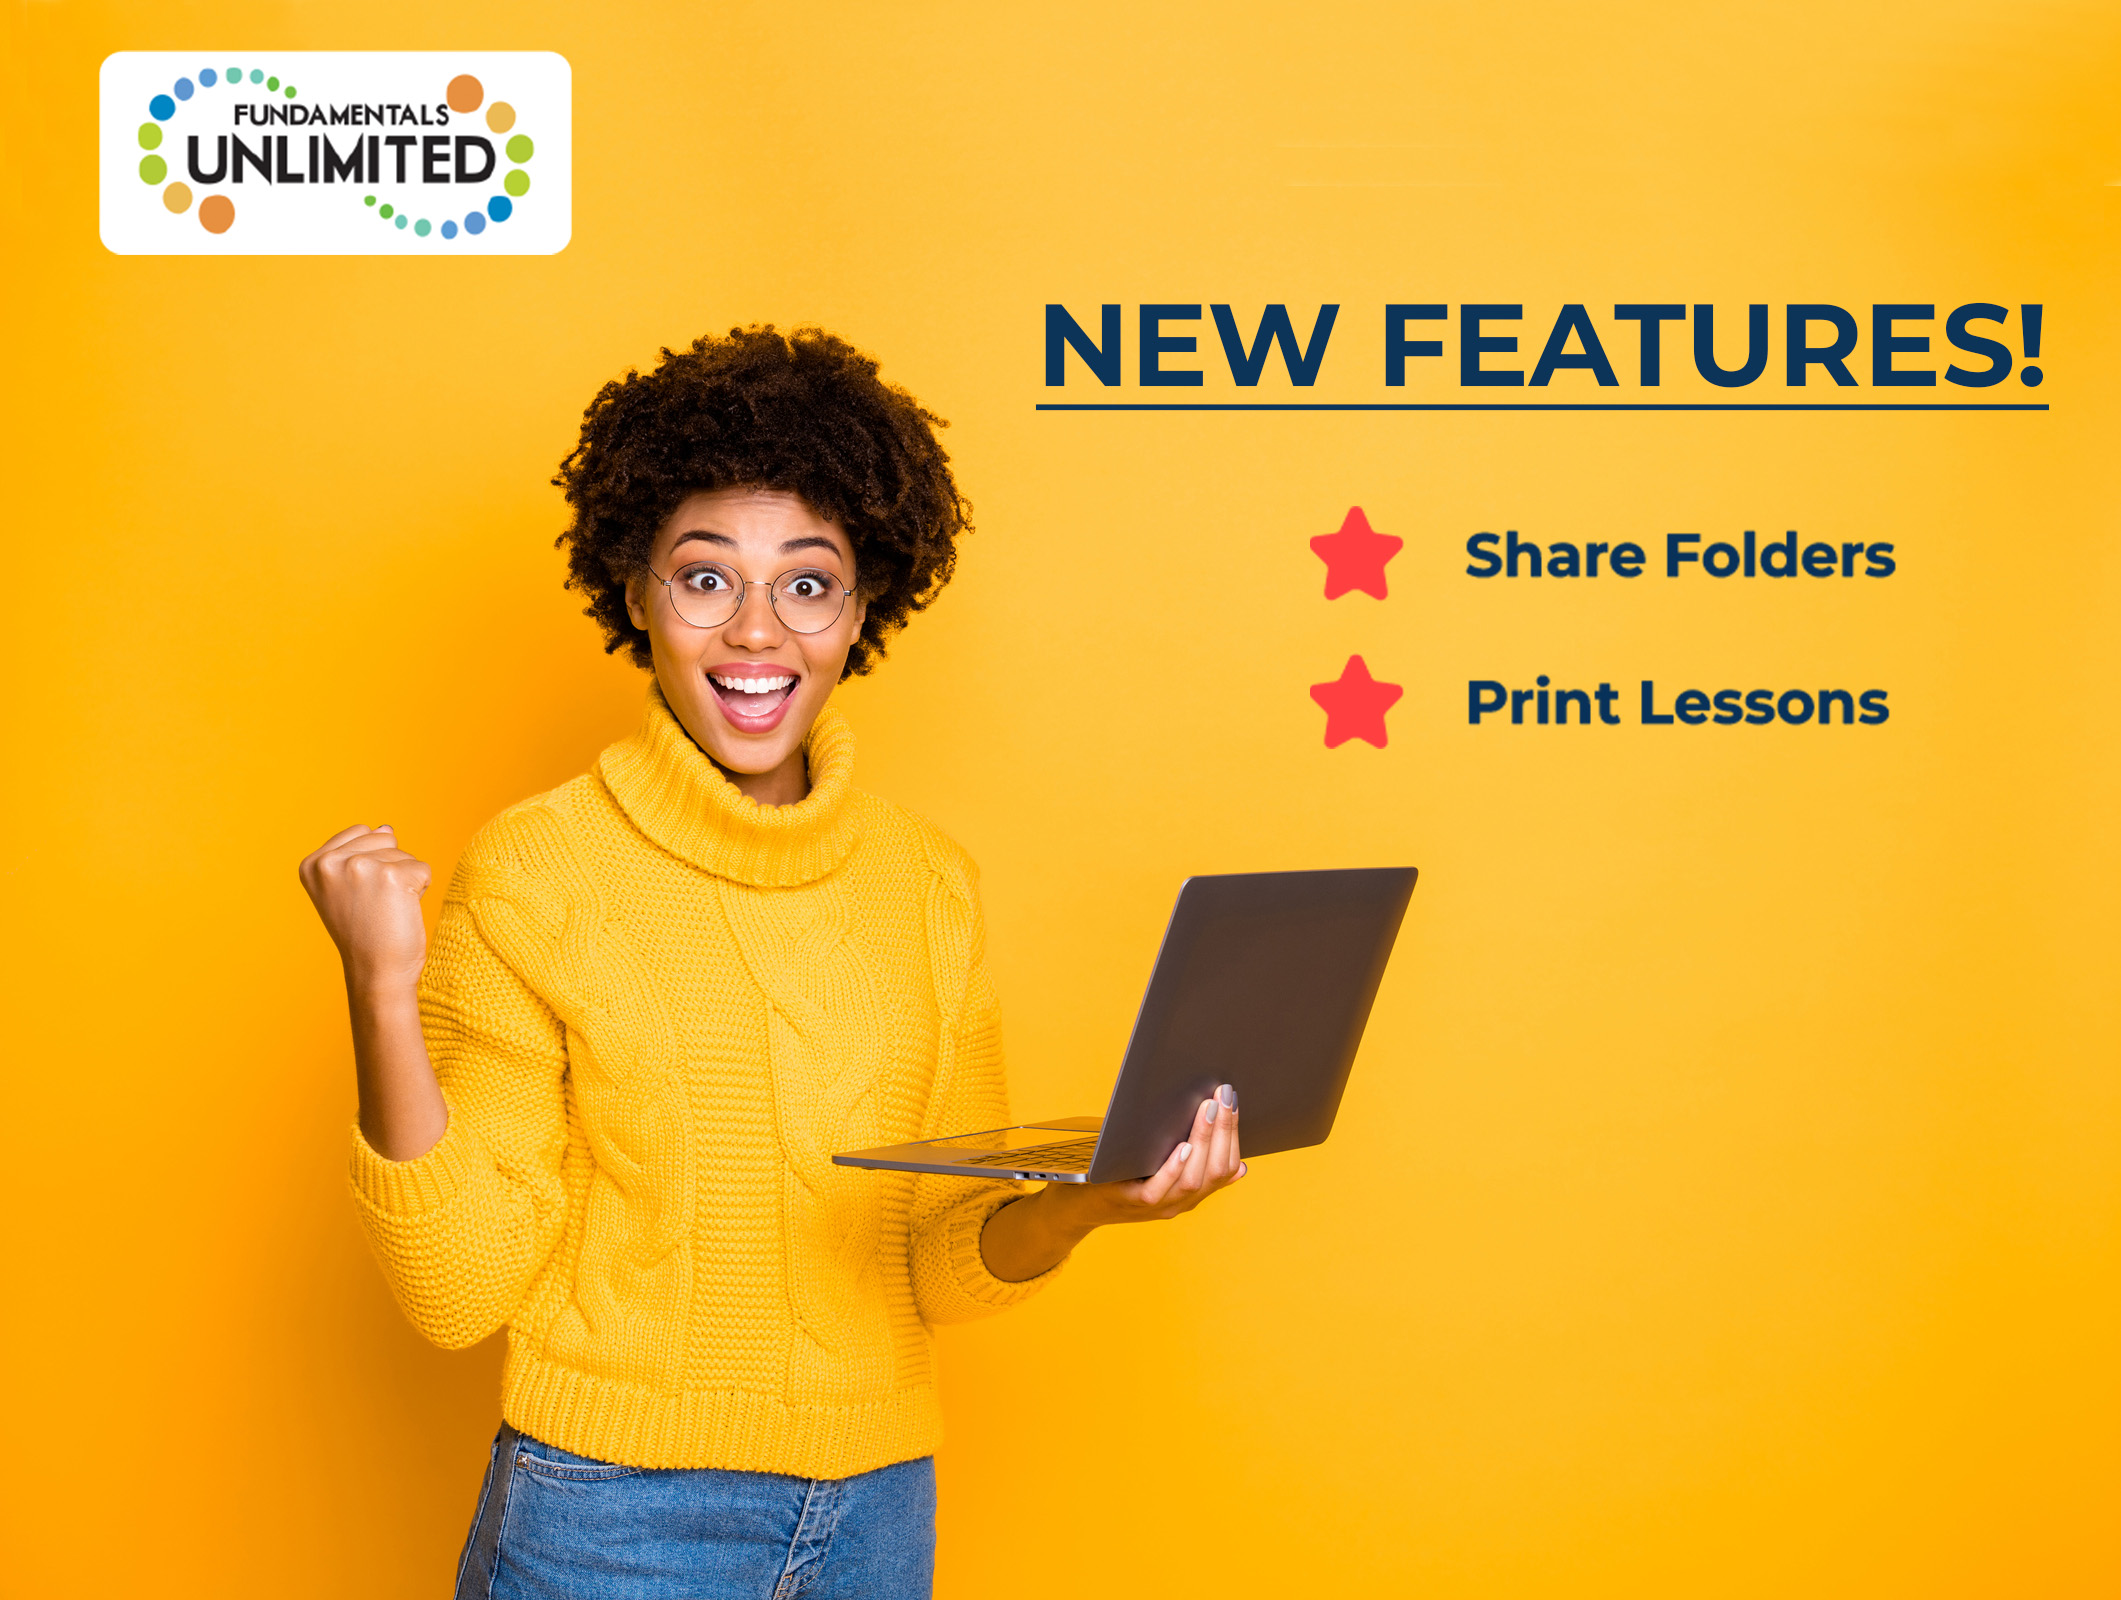 SHARE FOLDERS & PRINT LESSONS ON FUNDAMENTALS UNLIMITED